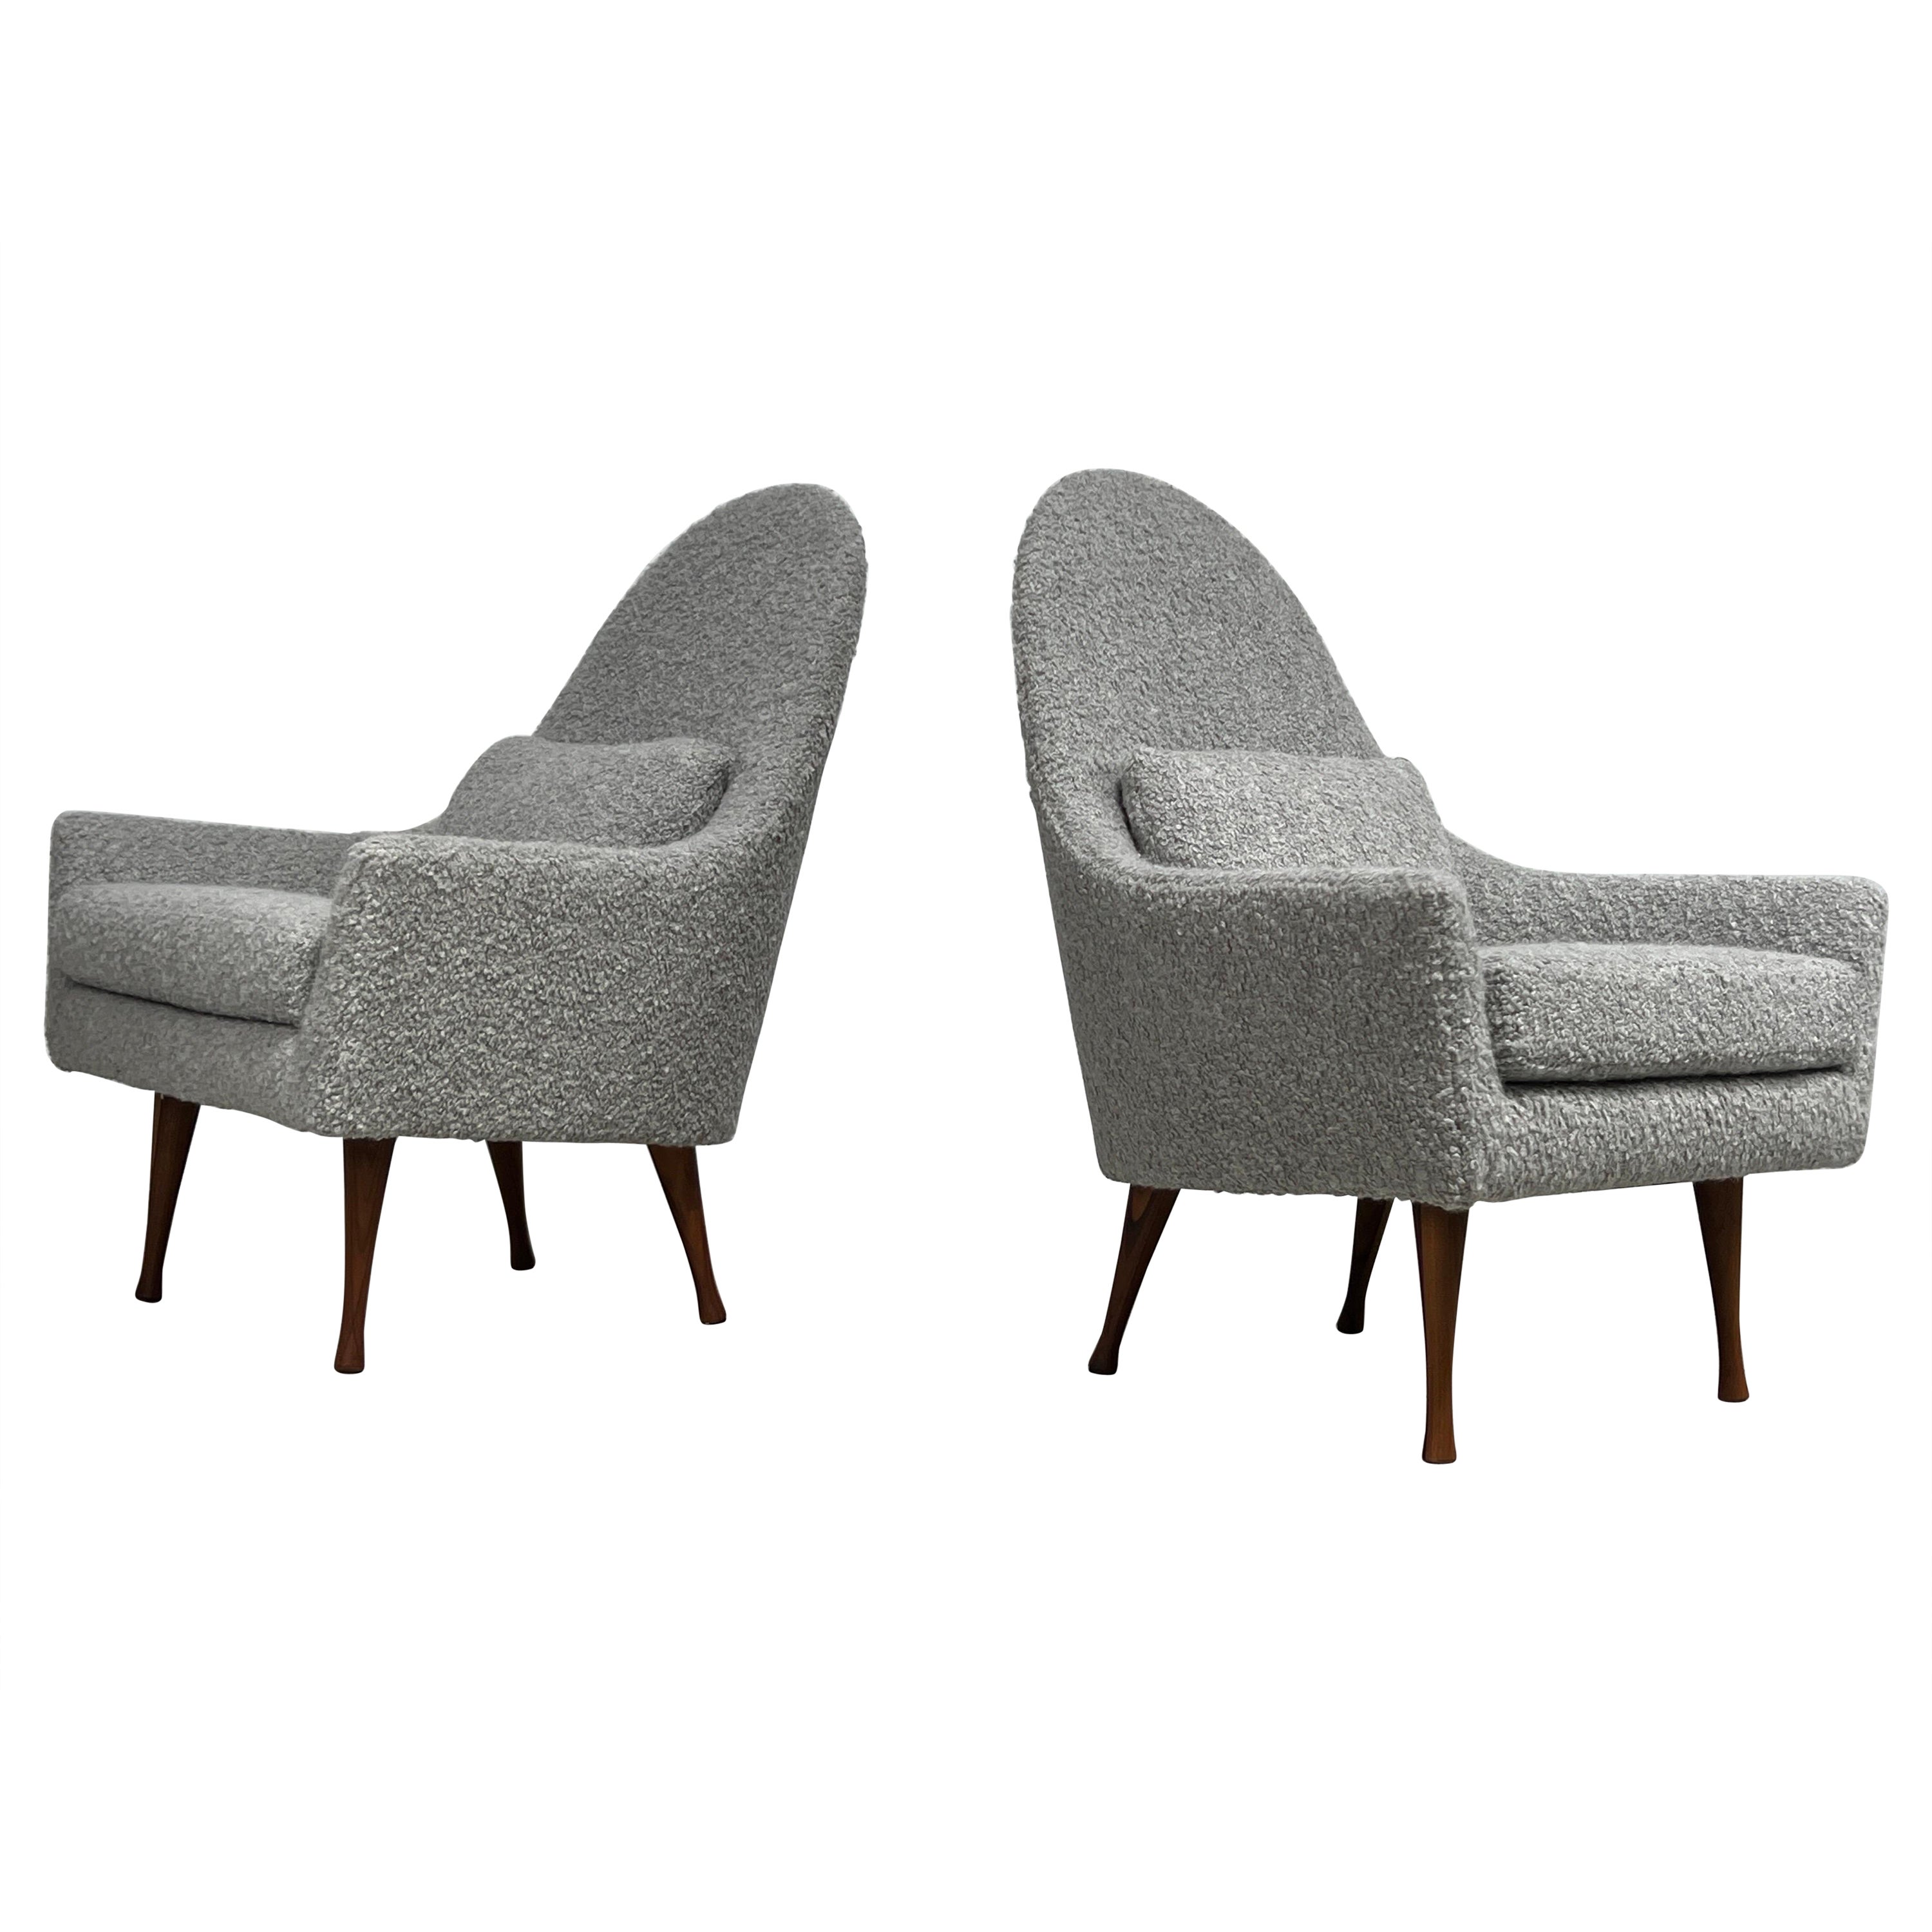 Pair of Lounge chairs by Paul McCobb for Widdicomb  For Sale